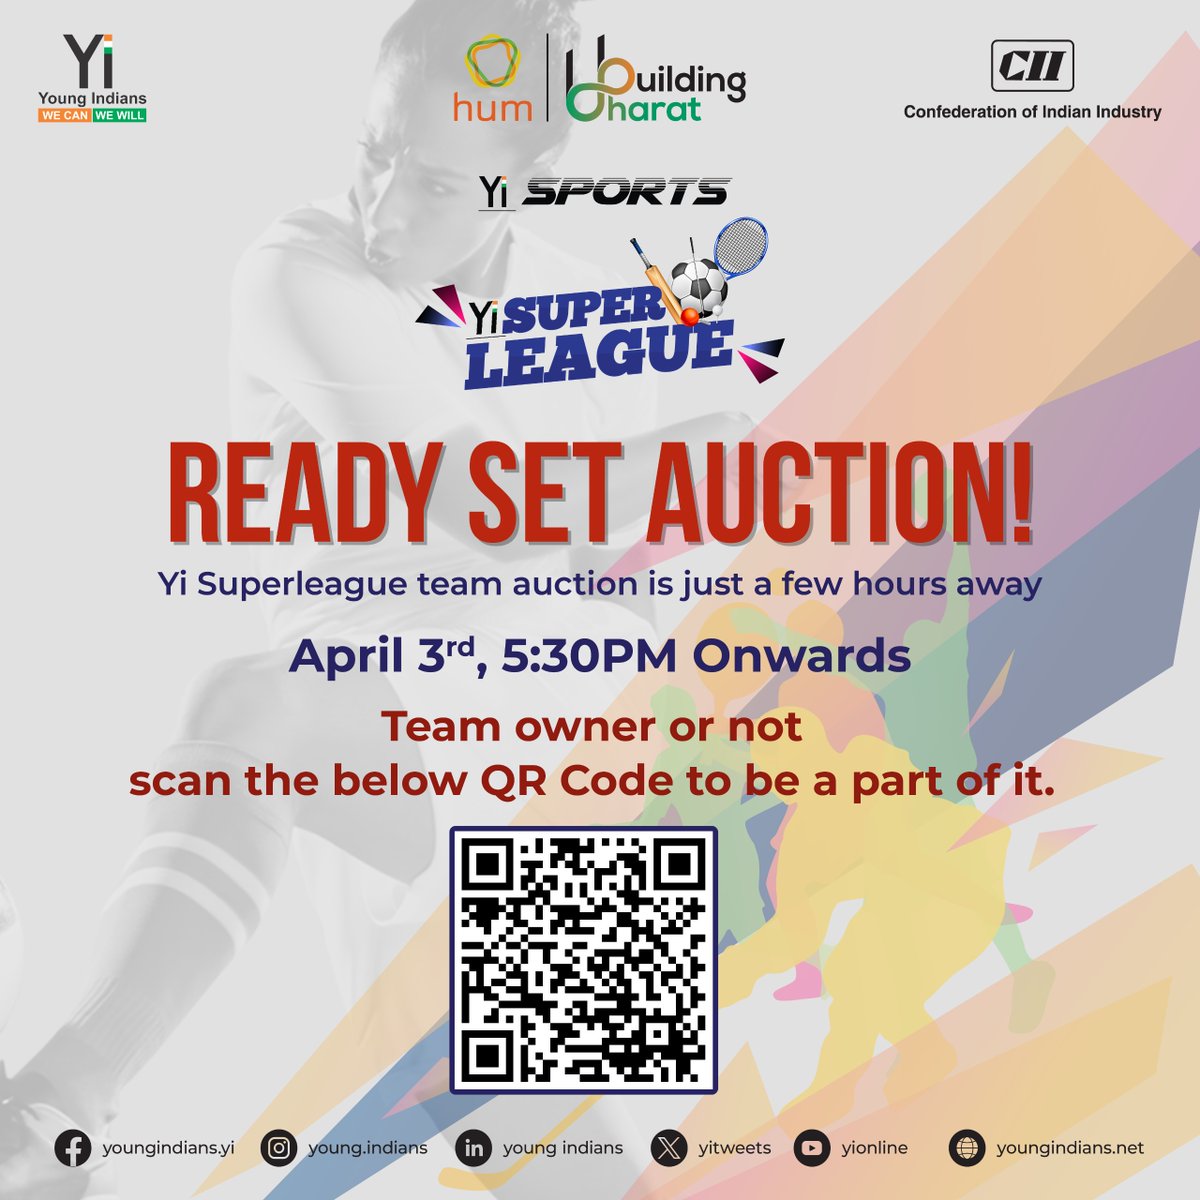 Raise the Stakes: It's Auction Time! Whether you're a team owner or not, don't miss the powerplay action of the Yi Superleague Auction today. Tune in for the ultimate sporting spectacle. #Yi #Cii #YoungIndians #NationBuilding #yisports #yiteam #sponsorship #buildingbharat #HUM